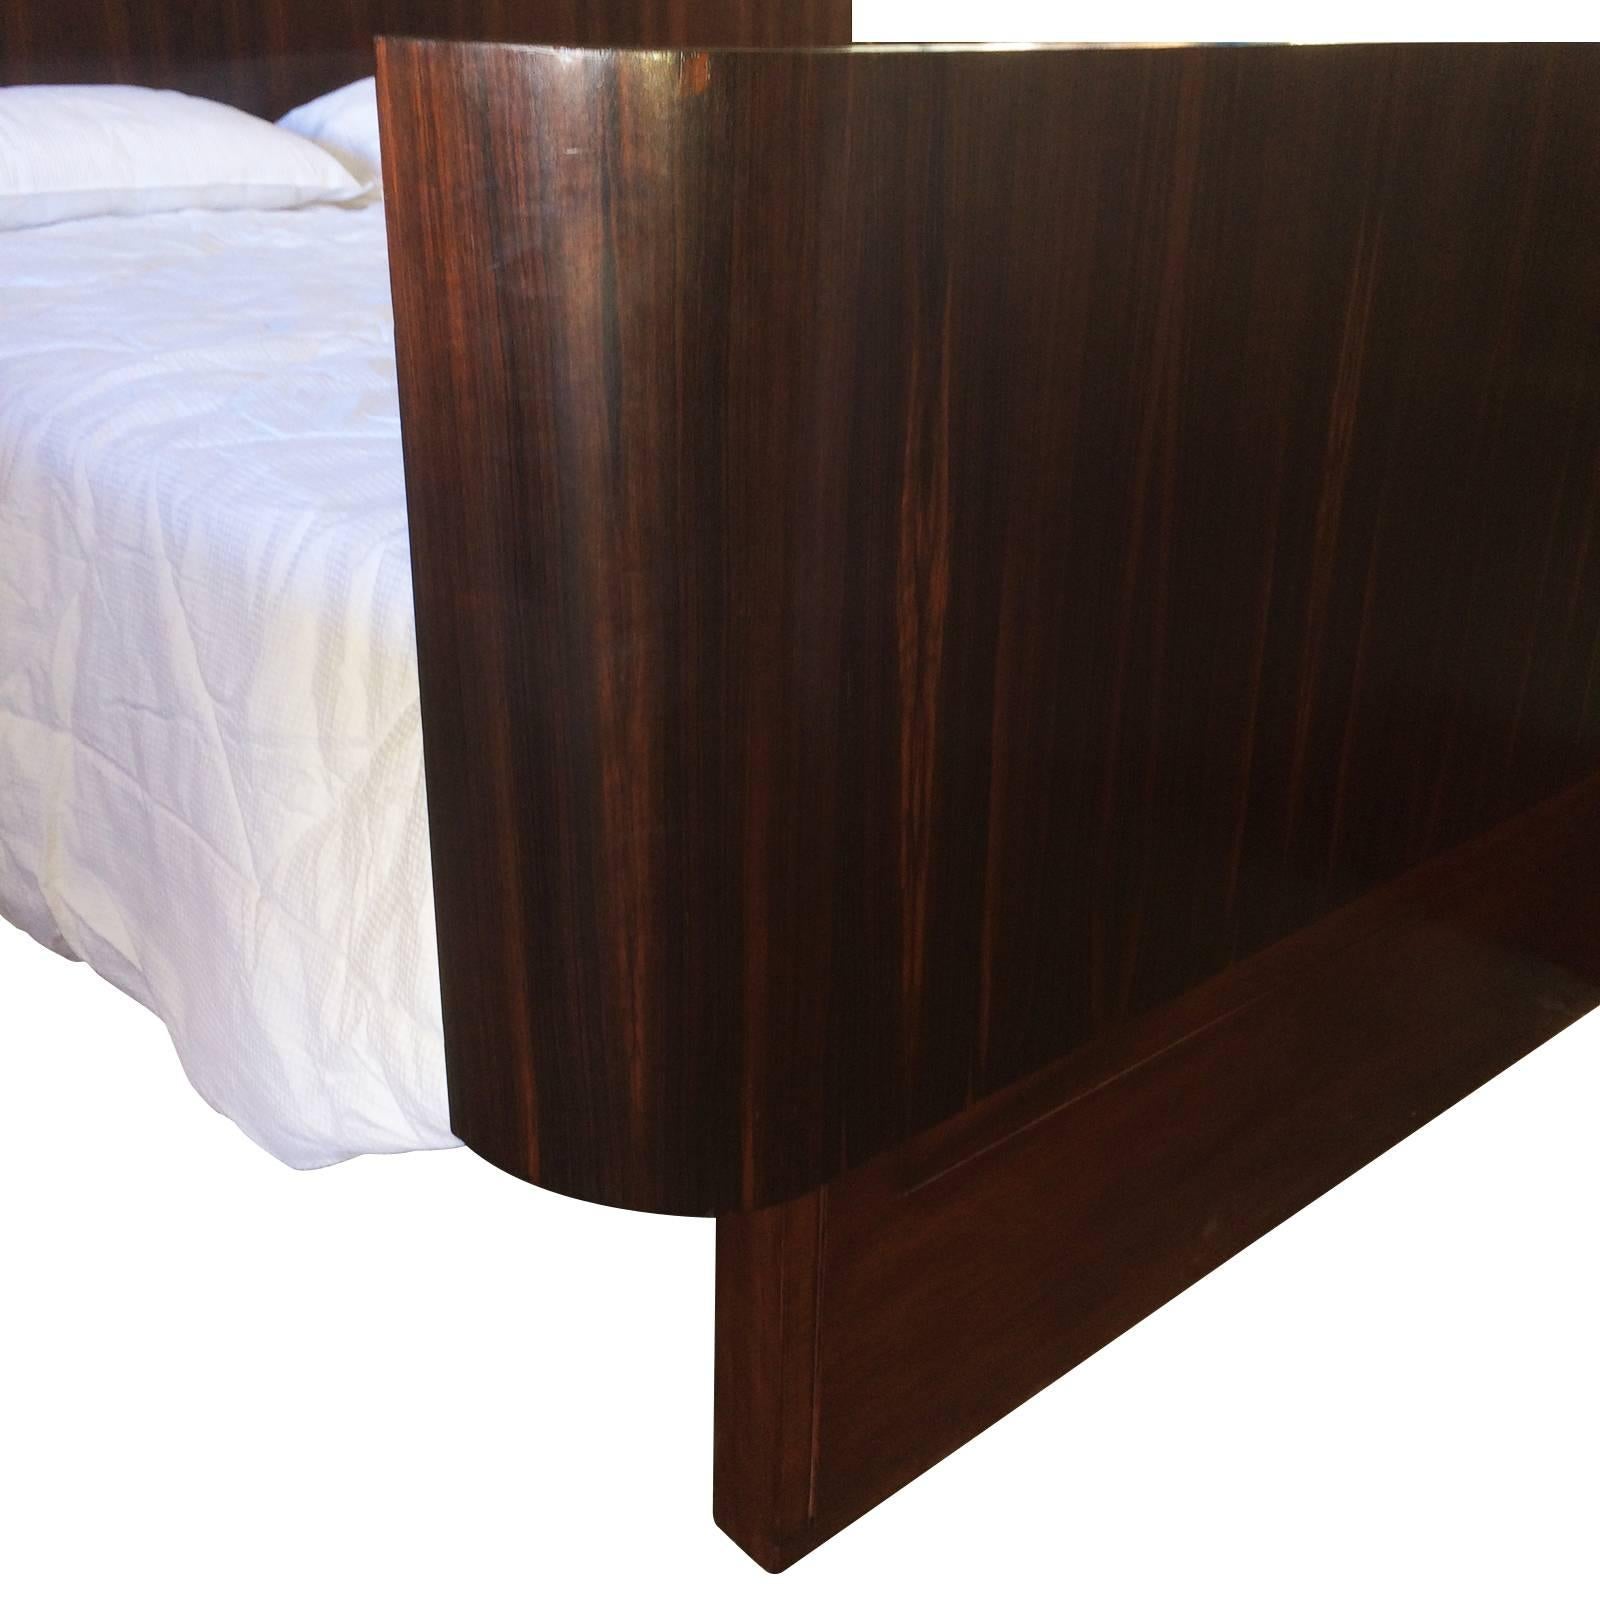 Art Deco Majorelle queen-size Bed in stunning French Macassar wood displaying the grain vertically with the veneer repeatedly mirror imaged over all surfaces and edges. The Majorelle Insignia is branded to a discreet rear area of the head.
The